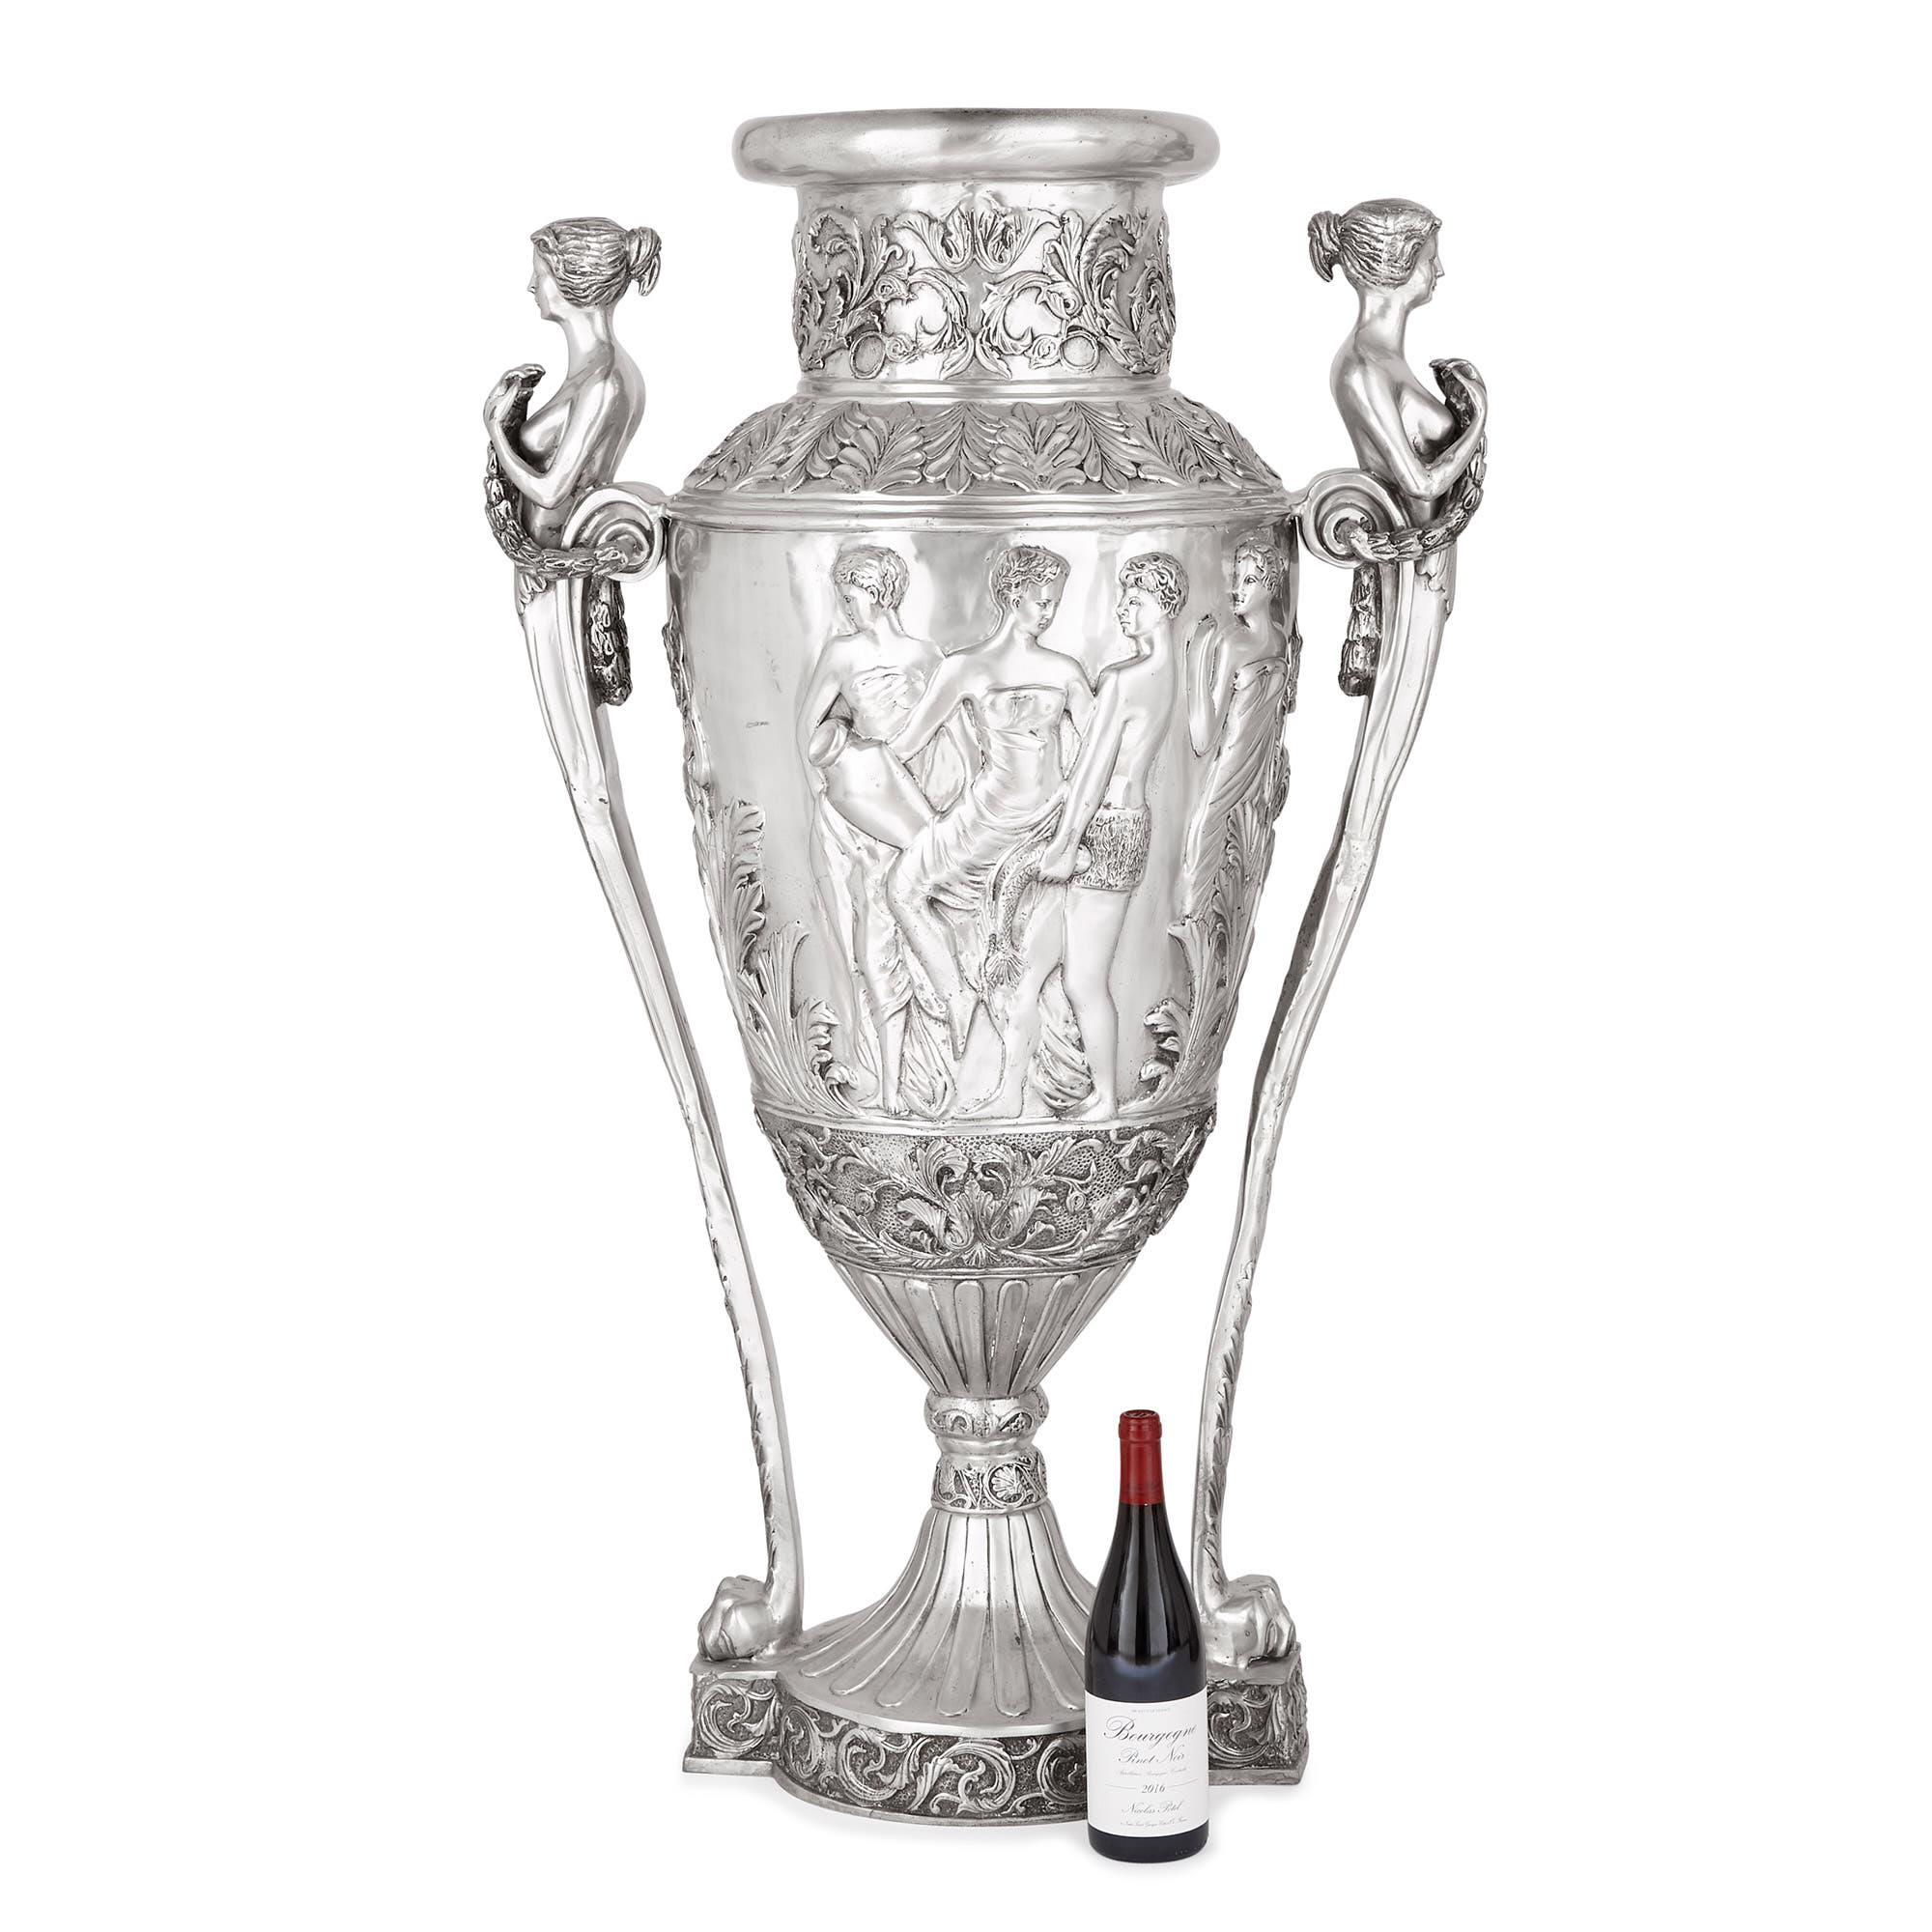 Standing 1.15 meters (45 inches) tall, these grand neoclassical style vases are designed to make an impact. Crafted from silvered bronze, the vases are truly magnificent works, which have been expertly cast and hammered, creating beautiful relief